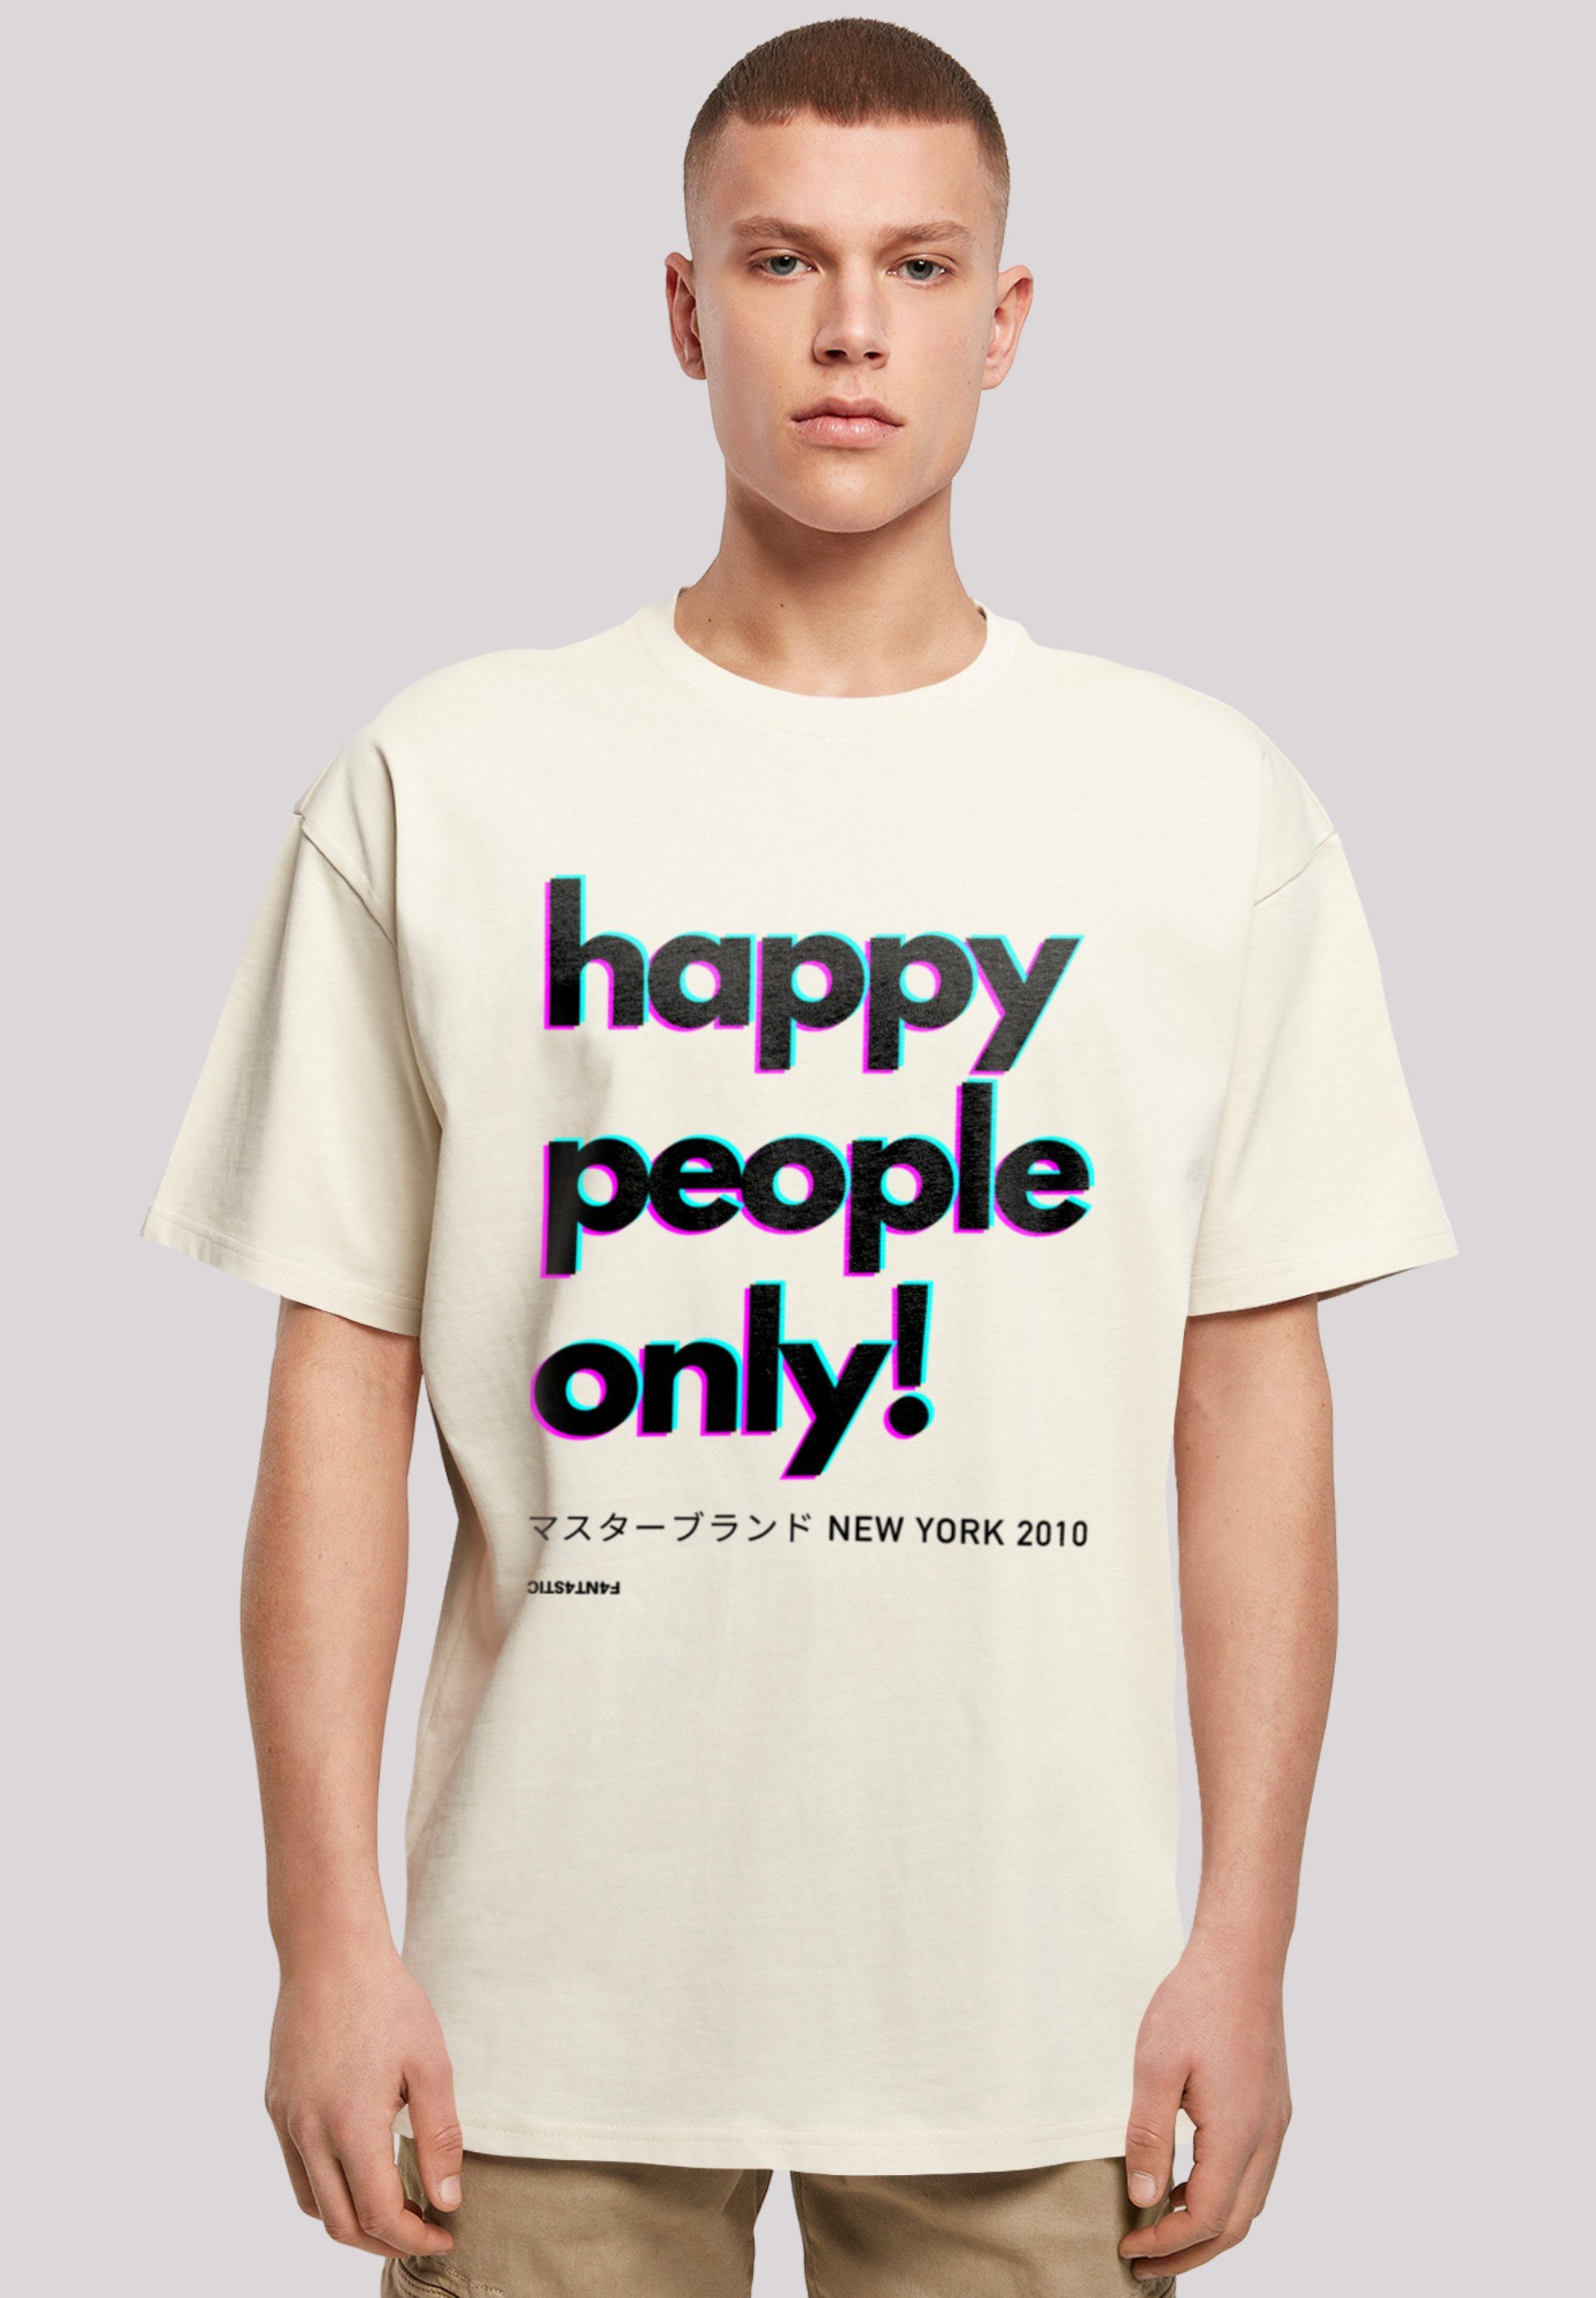 T-Shirt only York F4NT4STIC Print Happy sand people New